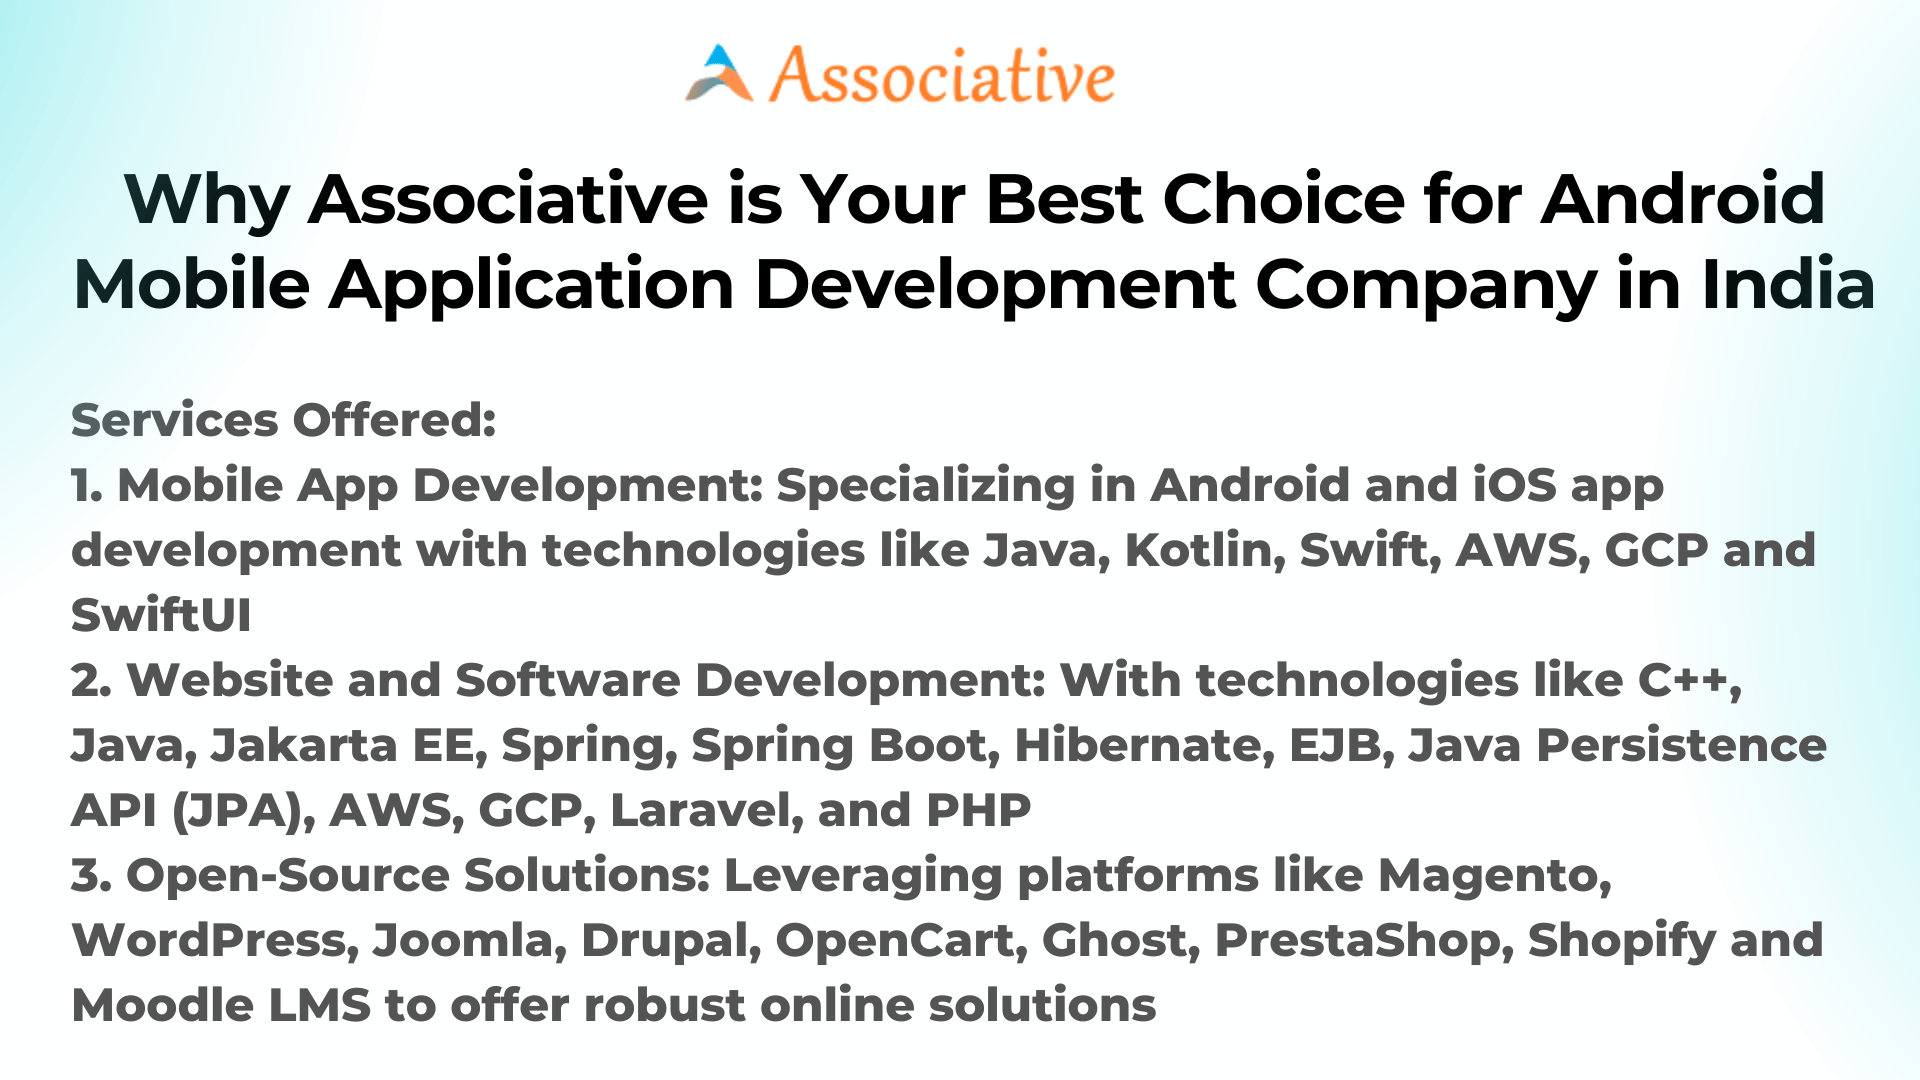 Why Associative is Your Best Choice for Android Mobile Application Development Company in India